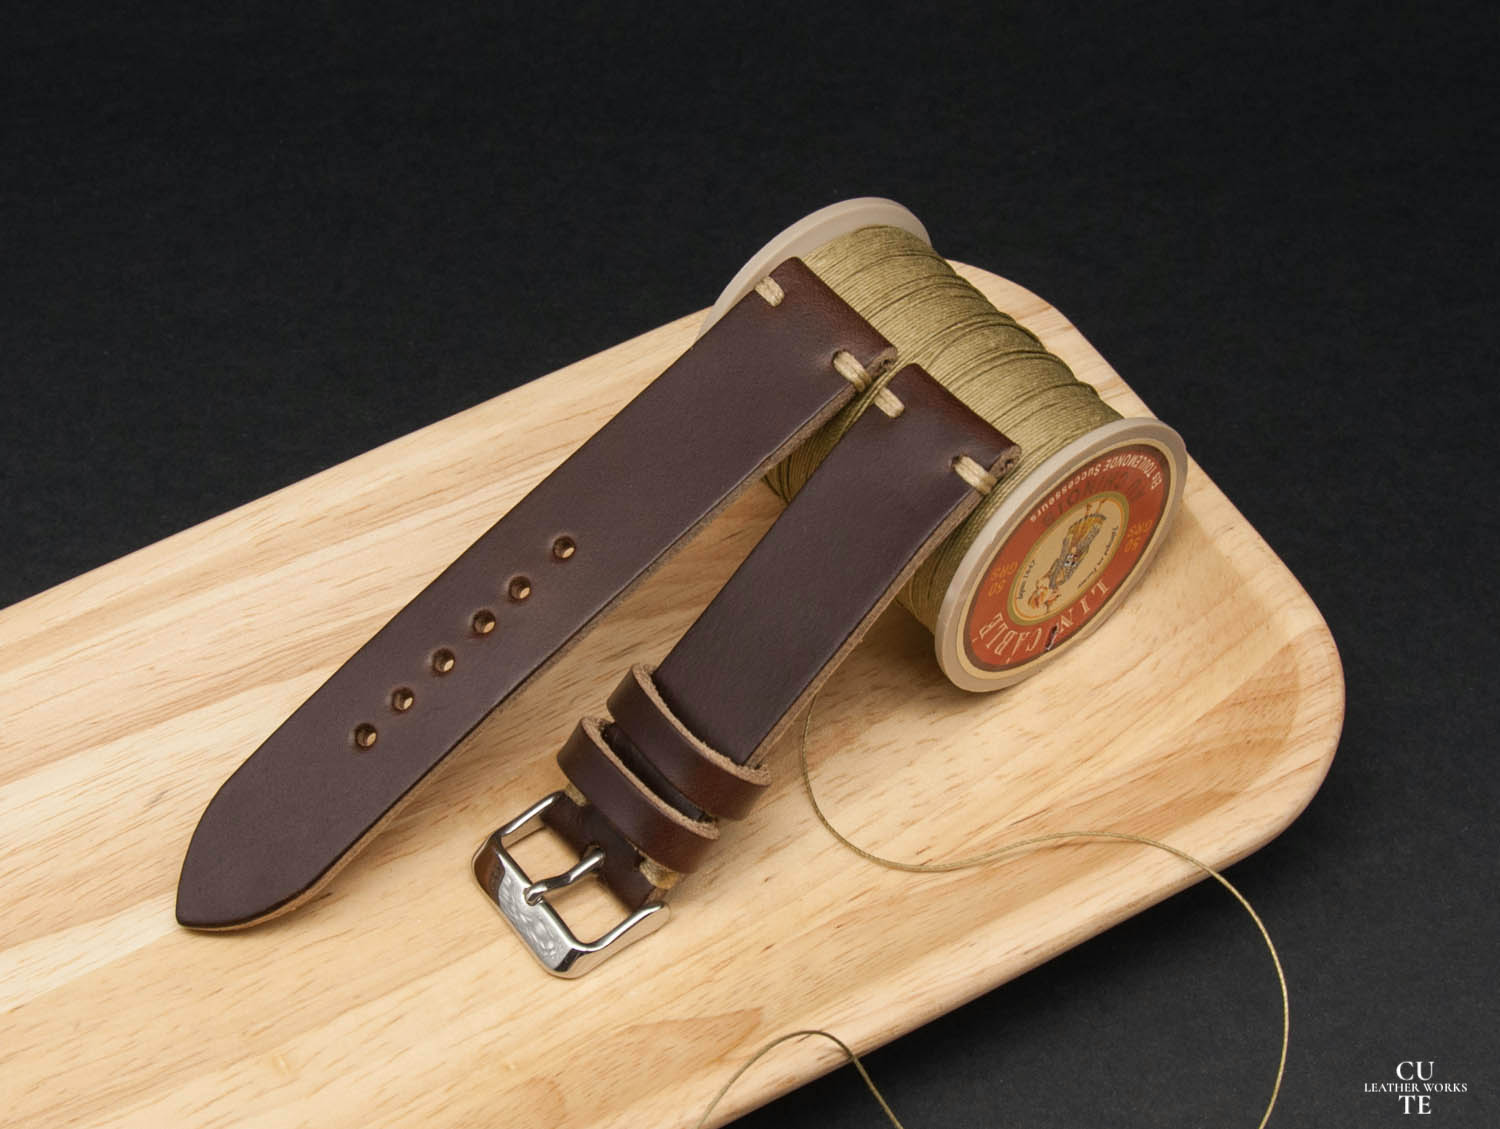 Horween Chrx Brown leather watch strap, Hand-made in Finland, With Lining